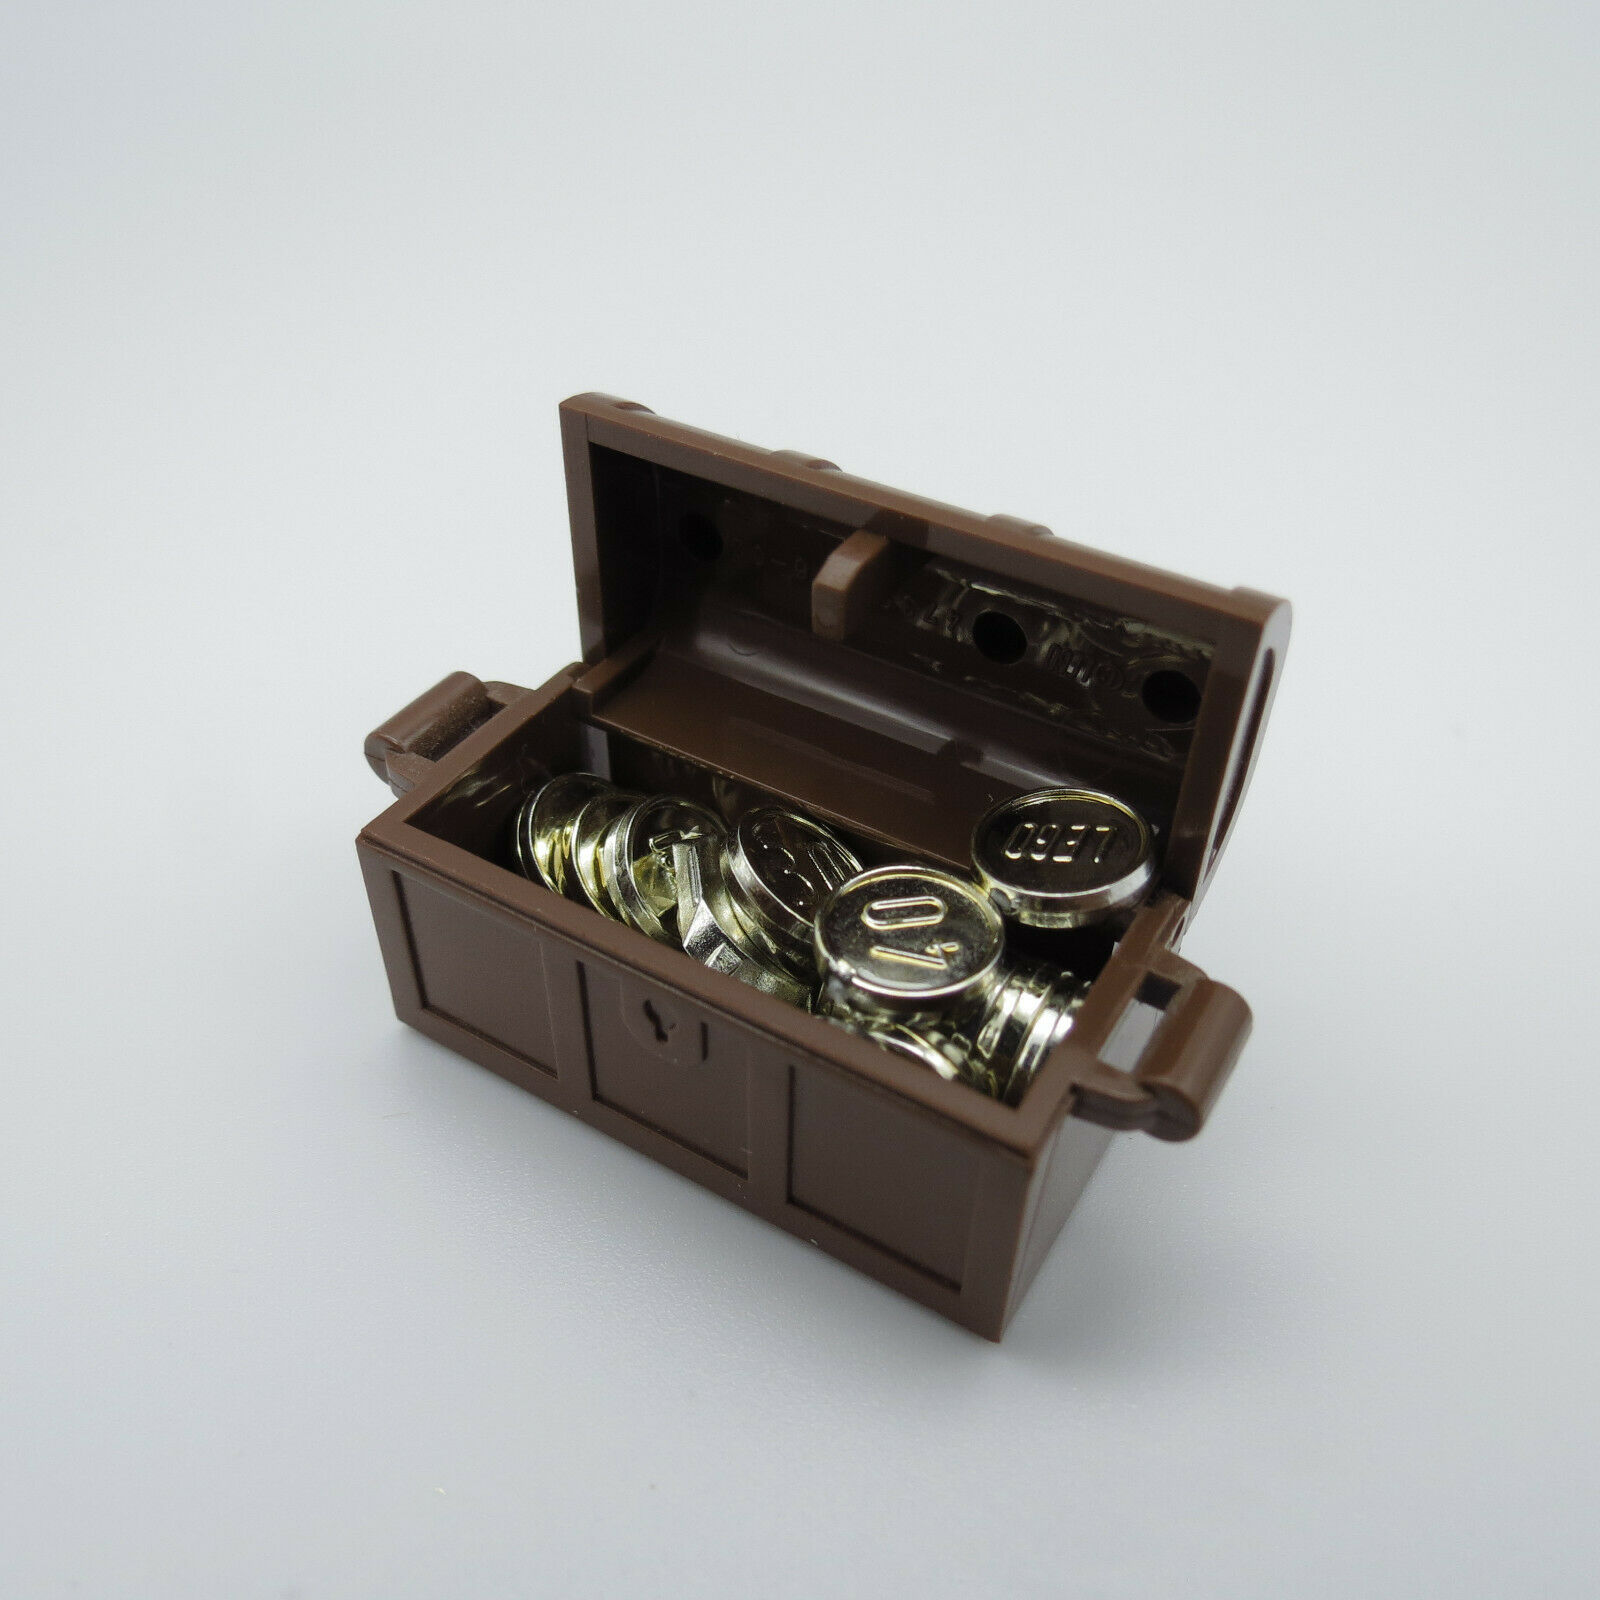 LEGO Brown Treasure Chest with Lego Coin Money - Image 1